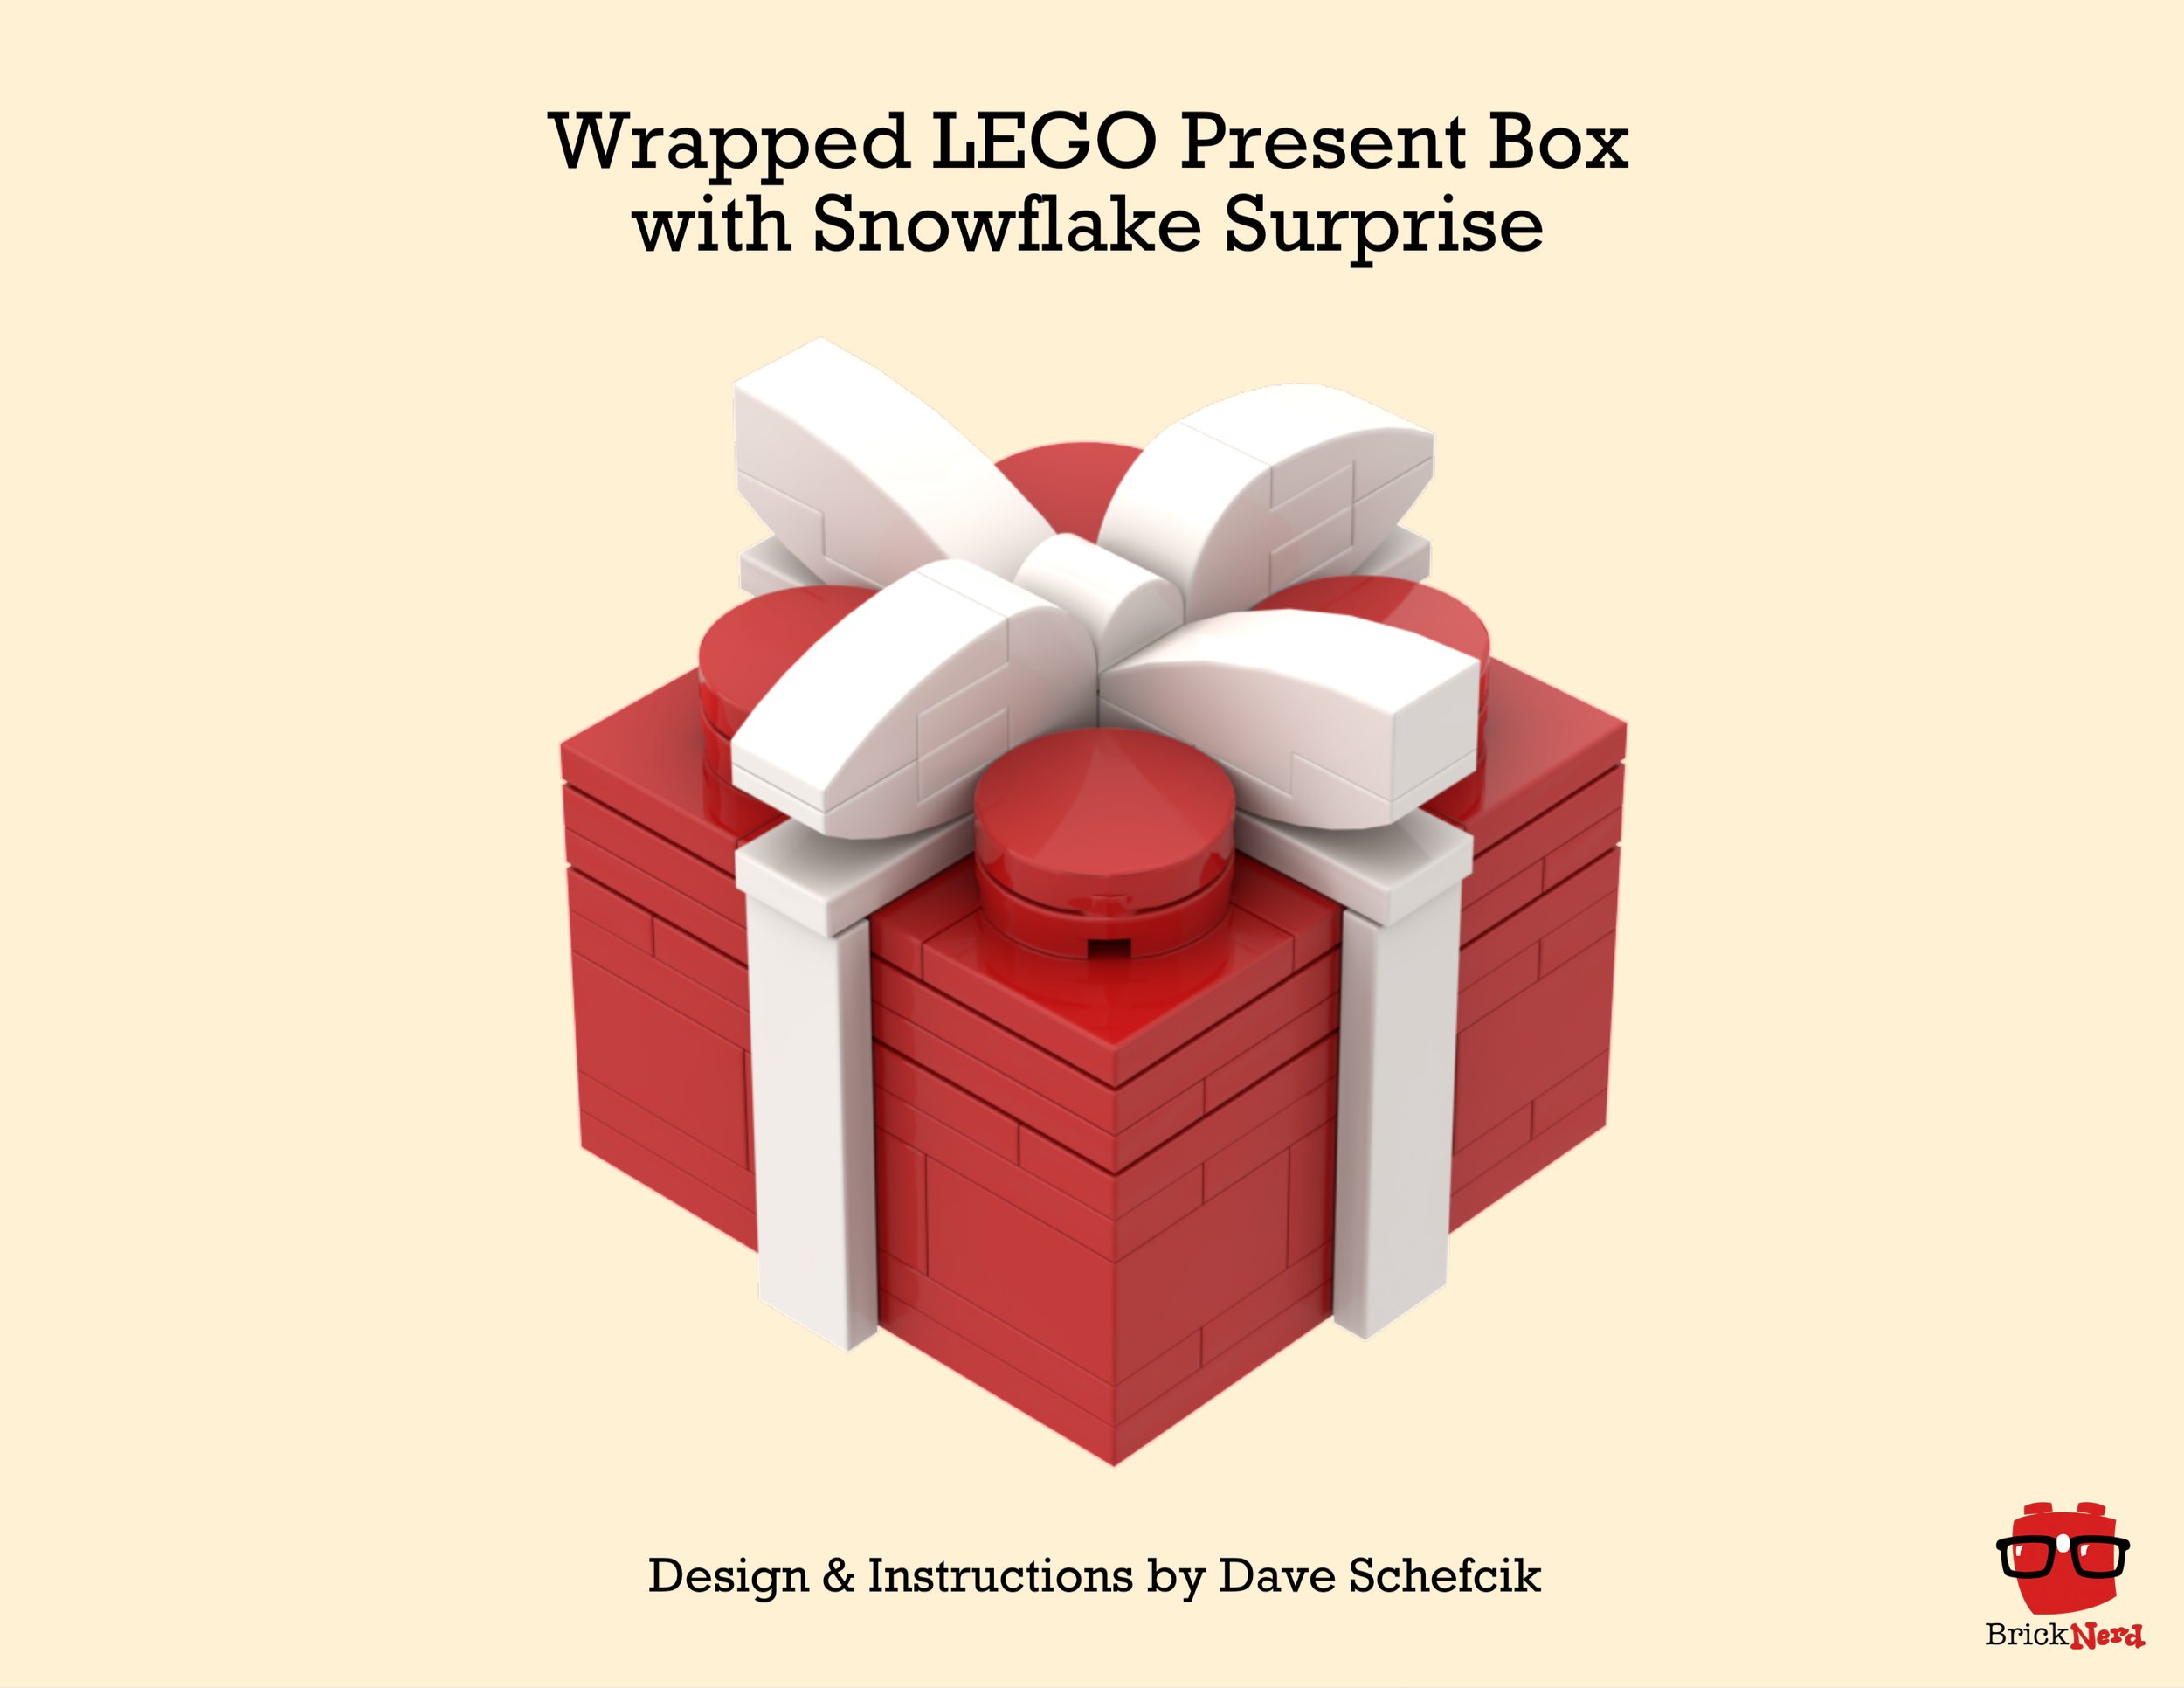 Instructions Build a Wrapped LEGO Present Box - BrickNerd - All things LEGO and the LEGO fan community